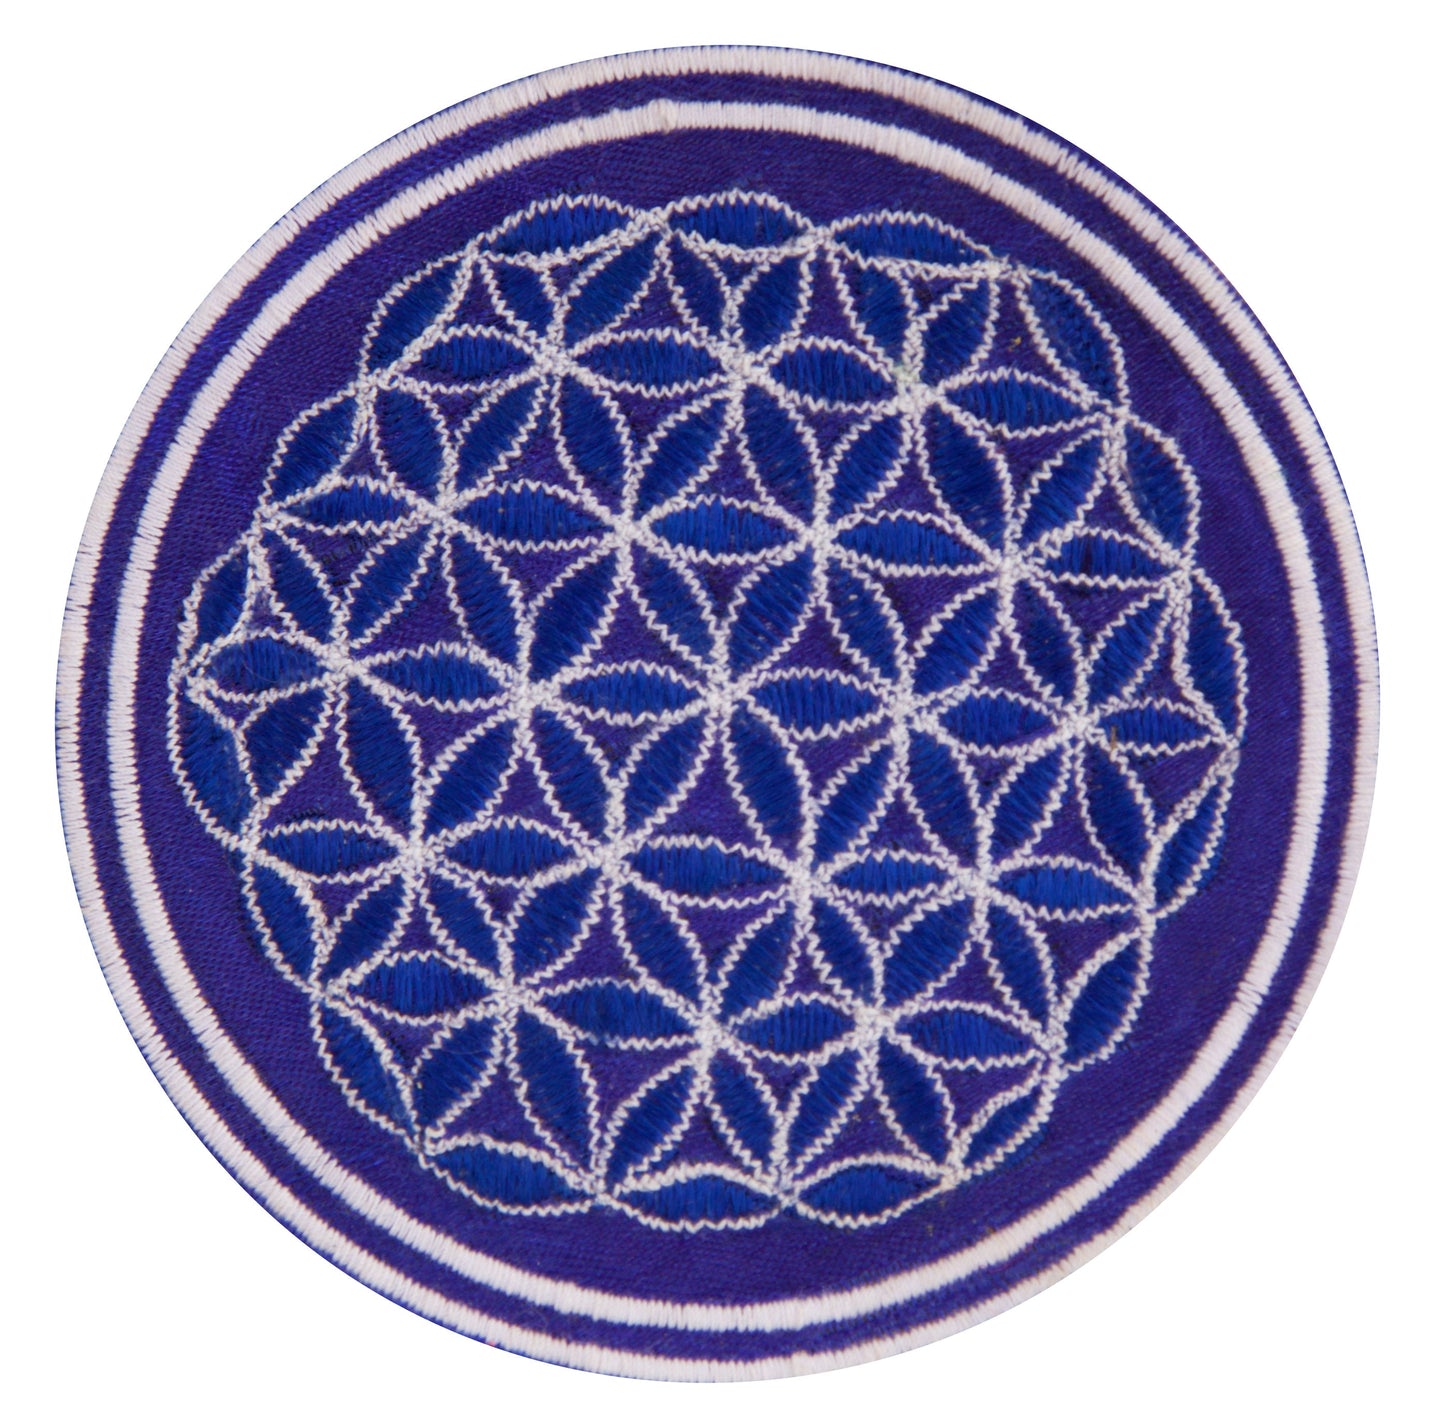 UV orange blue flower of life patch sacred geometry embroidery for sew on